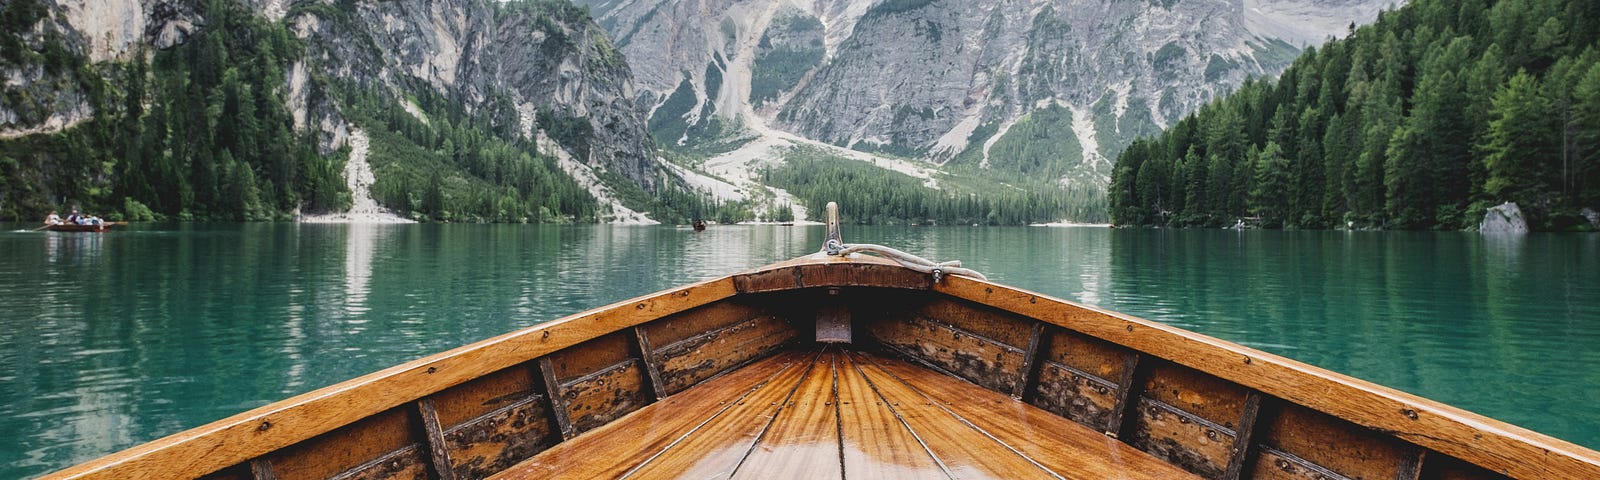 A view of mountains, forest, and a lake, from the position of someone seated in a wooden boat on the lake.